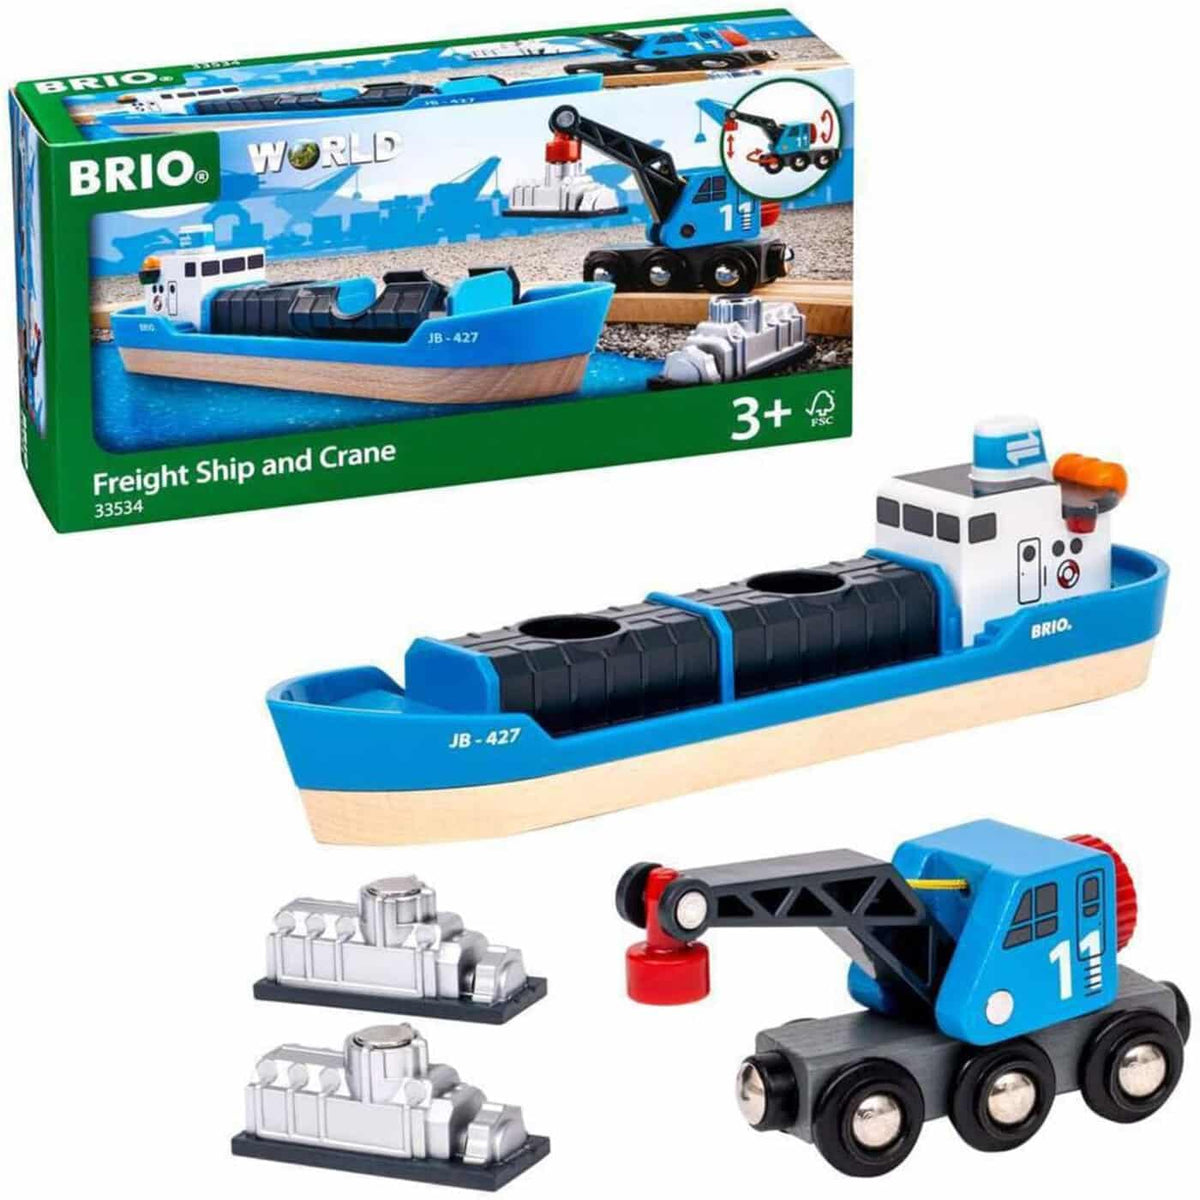 BRIO VEHICLE - FREIGHT SHIP AND CRANE - 4 PIECES - 33534